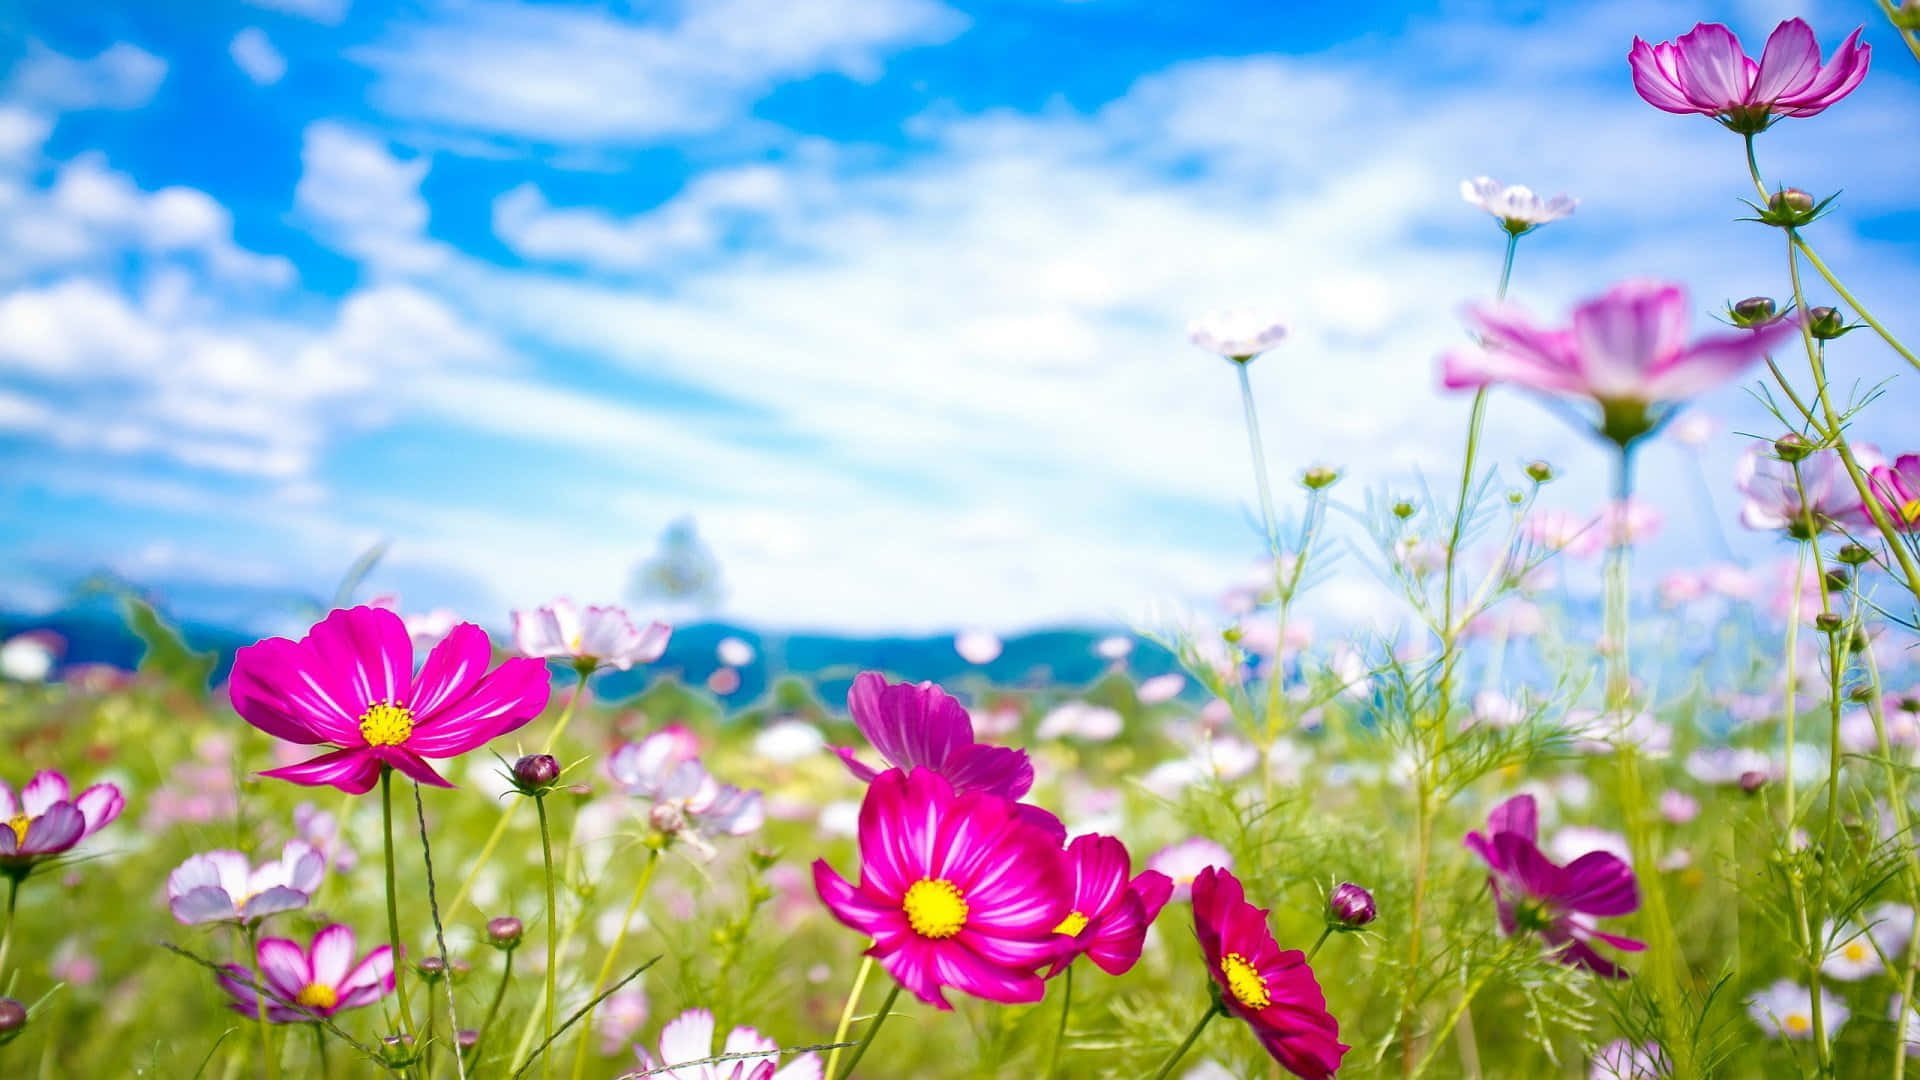 A Field Of Pink Flowers With Blue Sky And Clouds